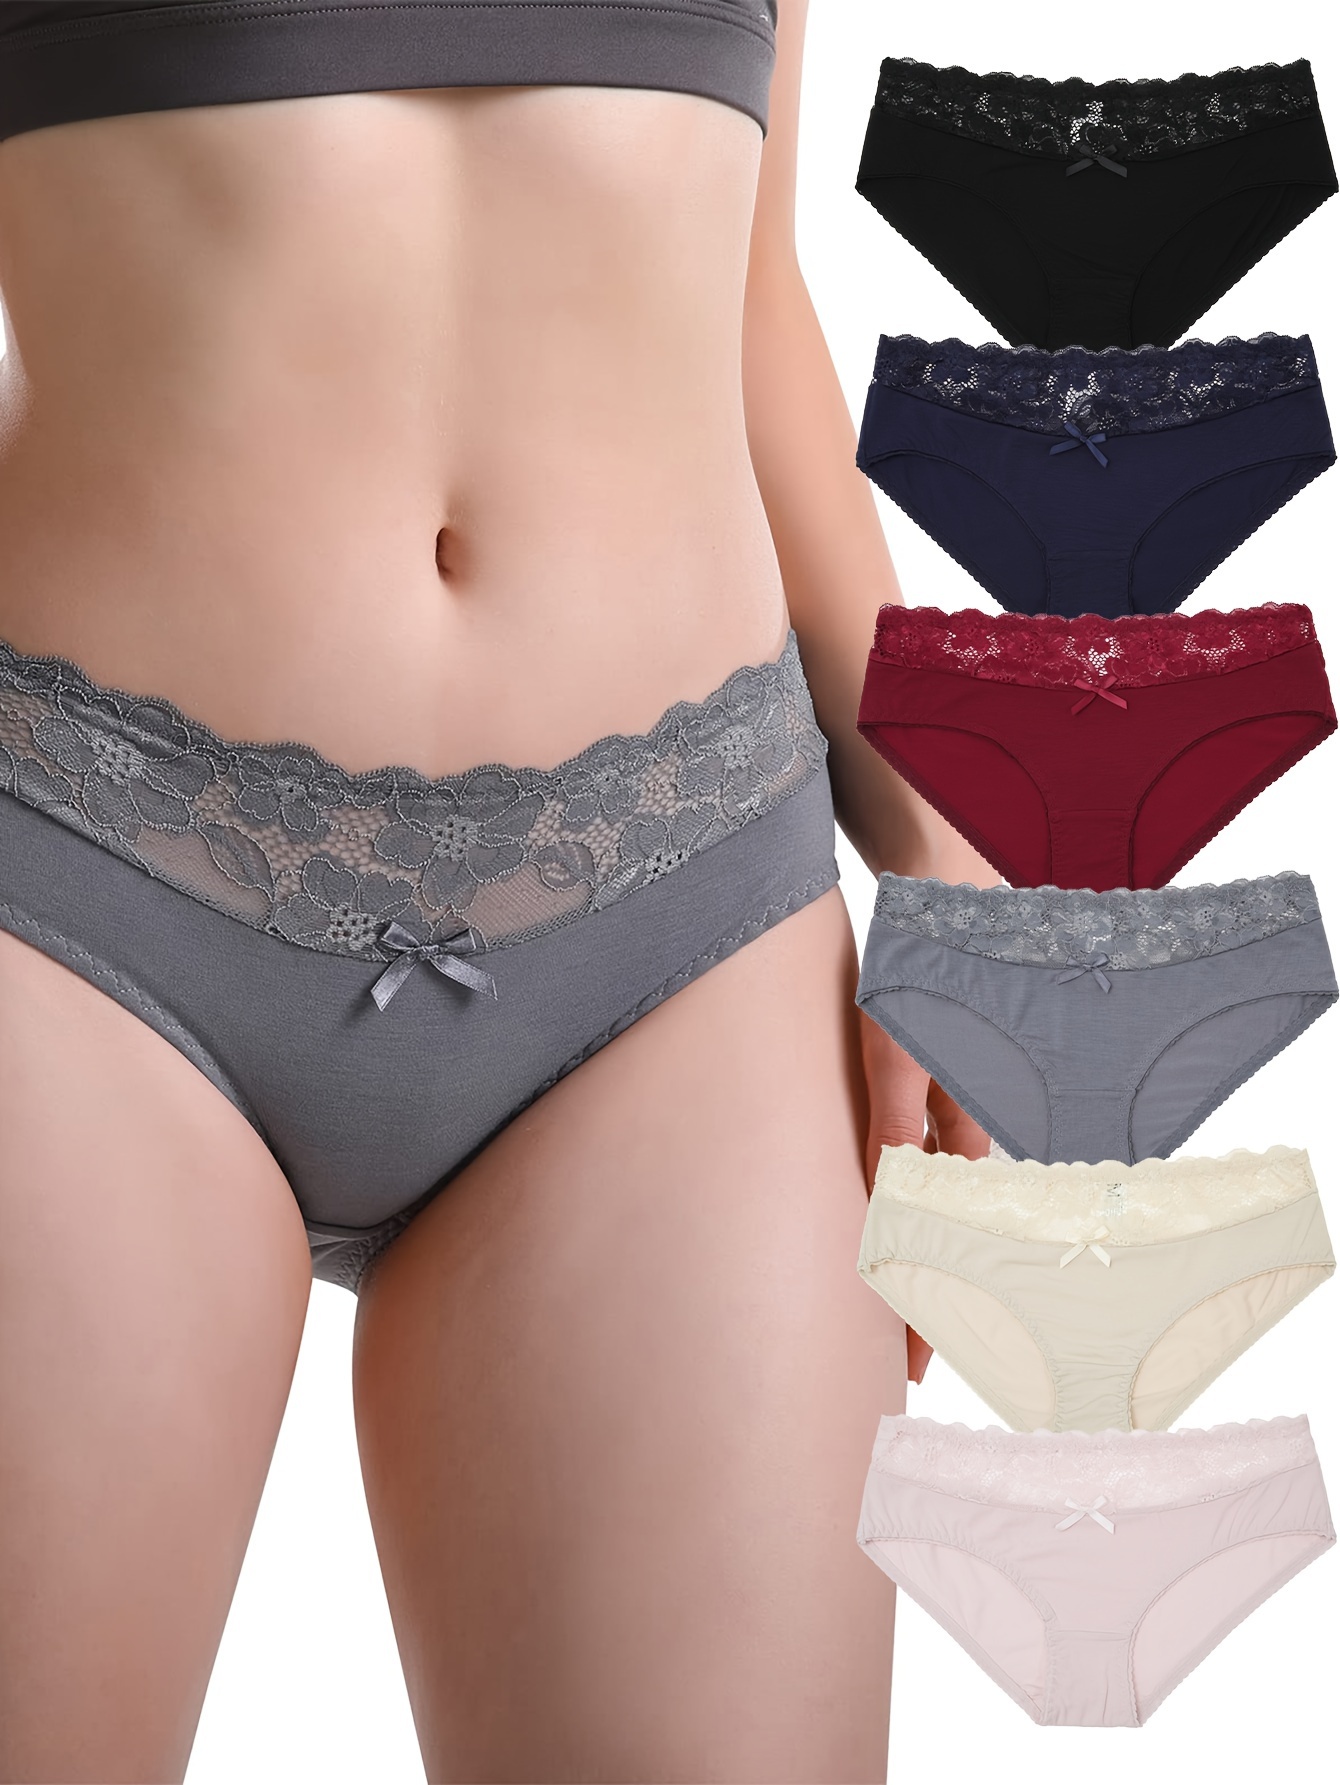 Tea Dyed Historical Knickers Undergarments with Lace Trim, for